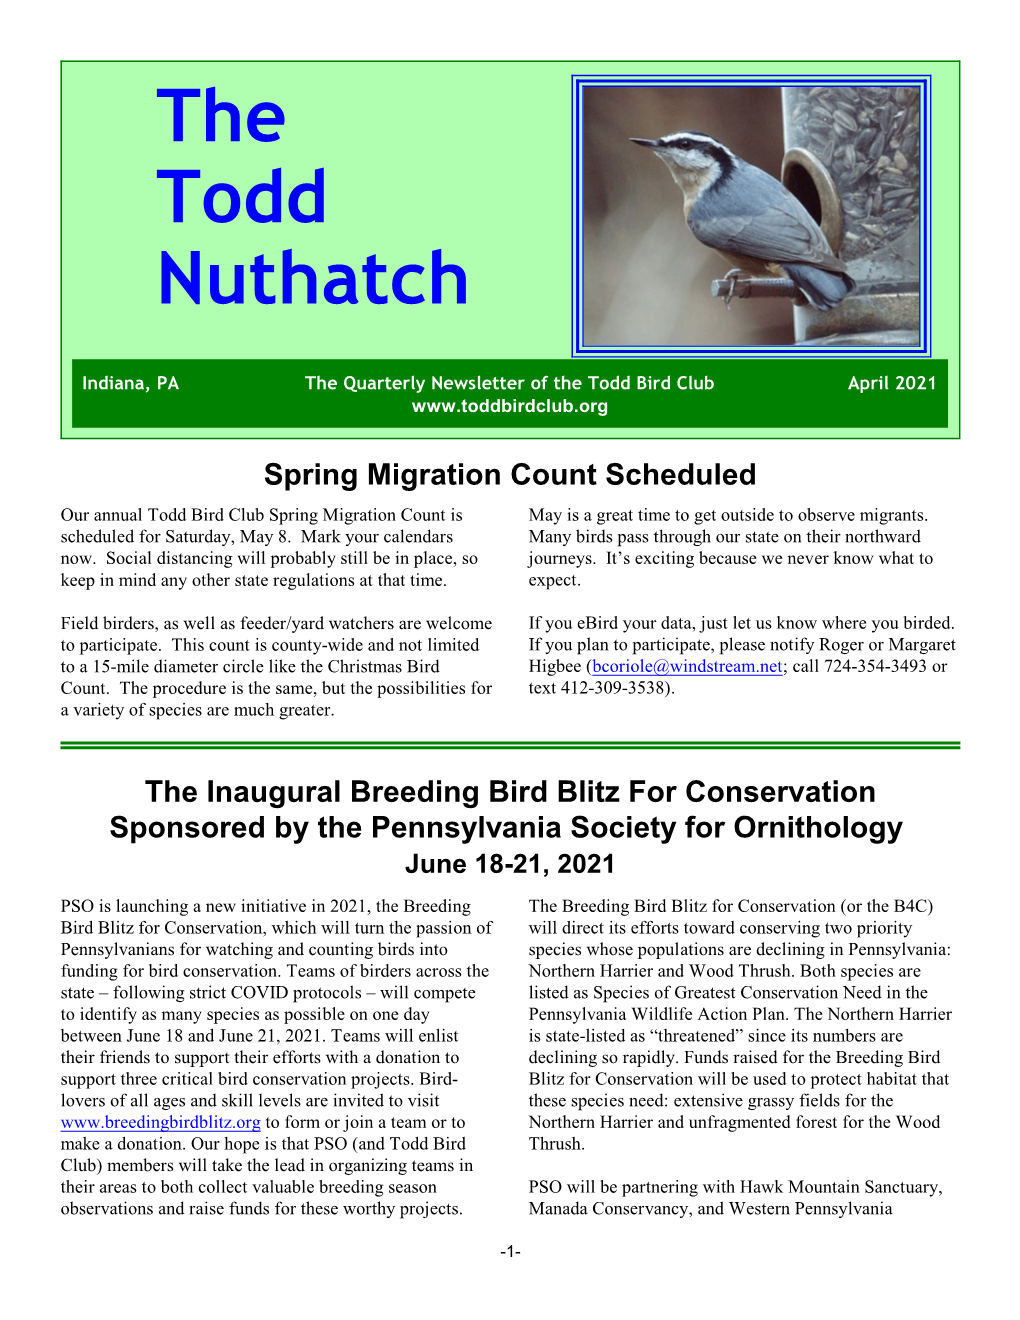 The Todd Nuthatch